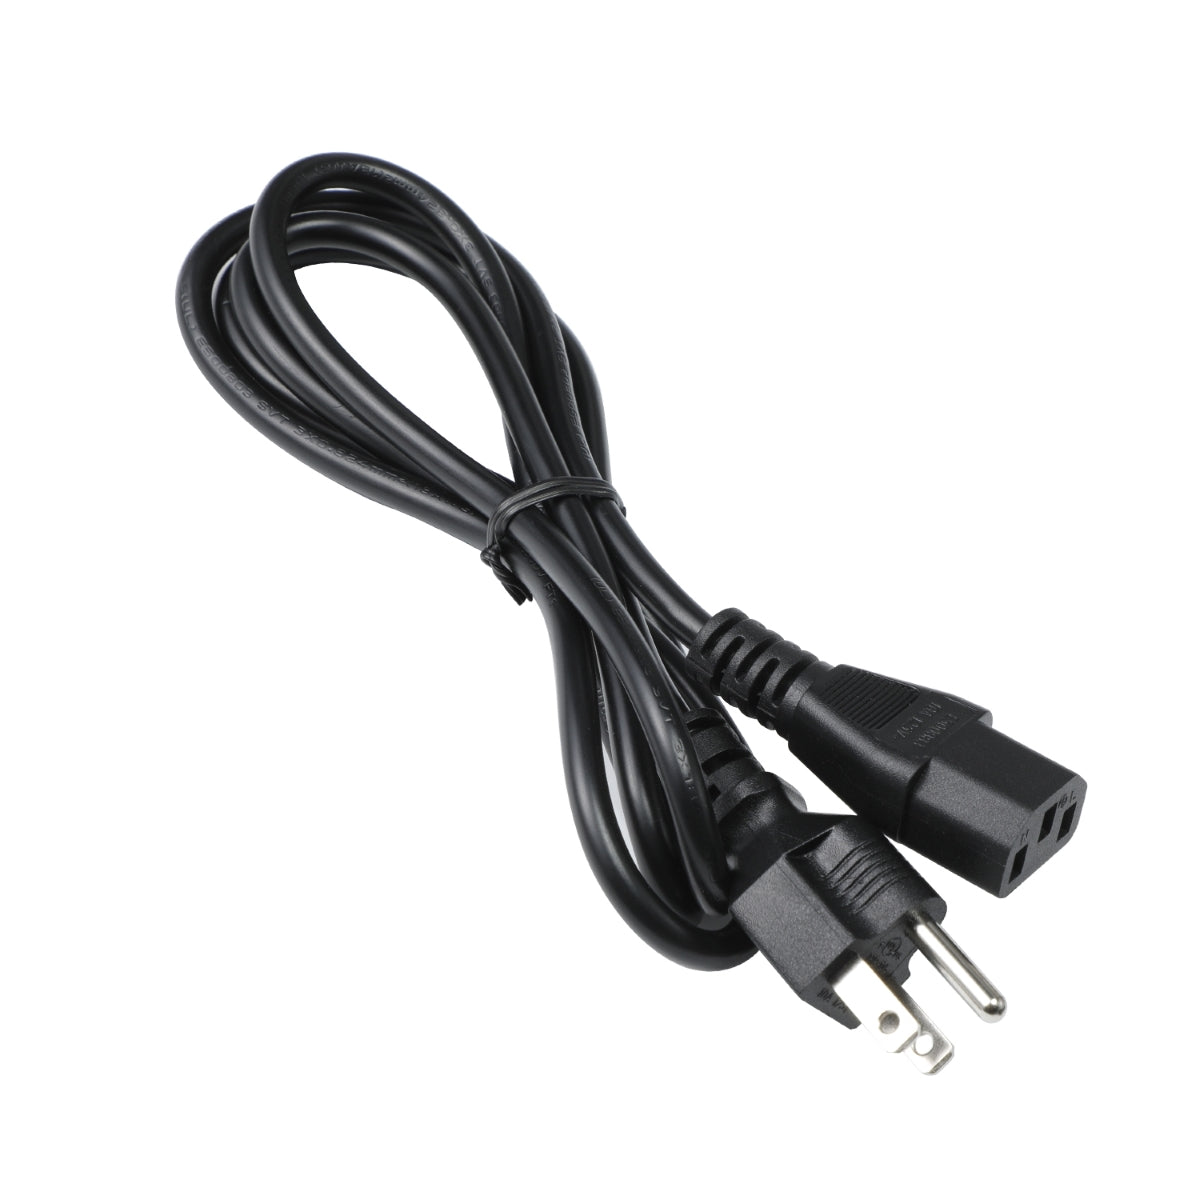 Power Cord for HP Pavilion 550-044ld Computer.